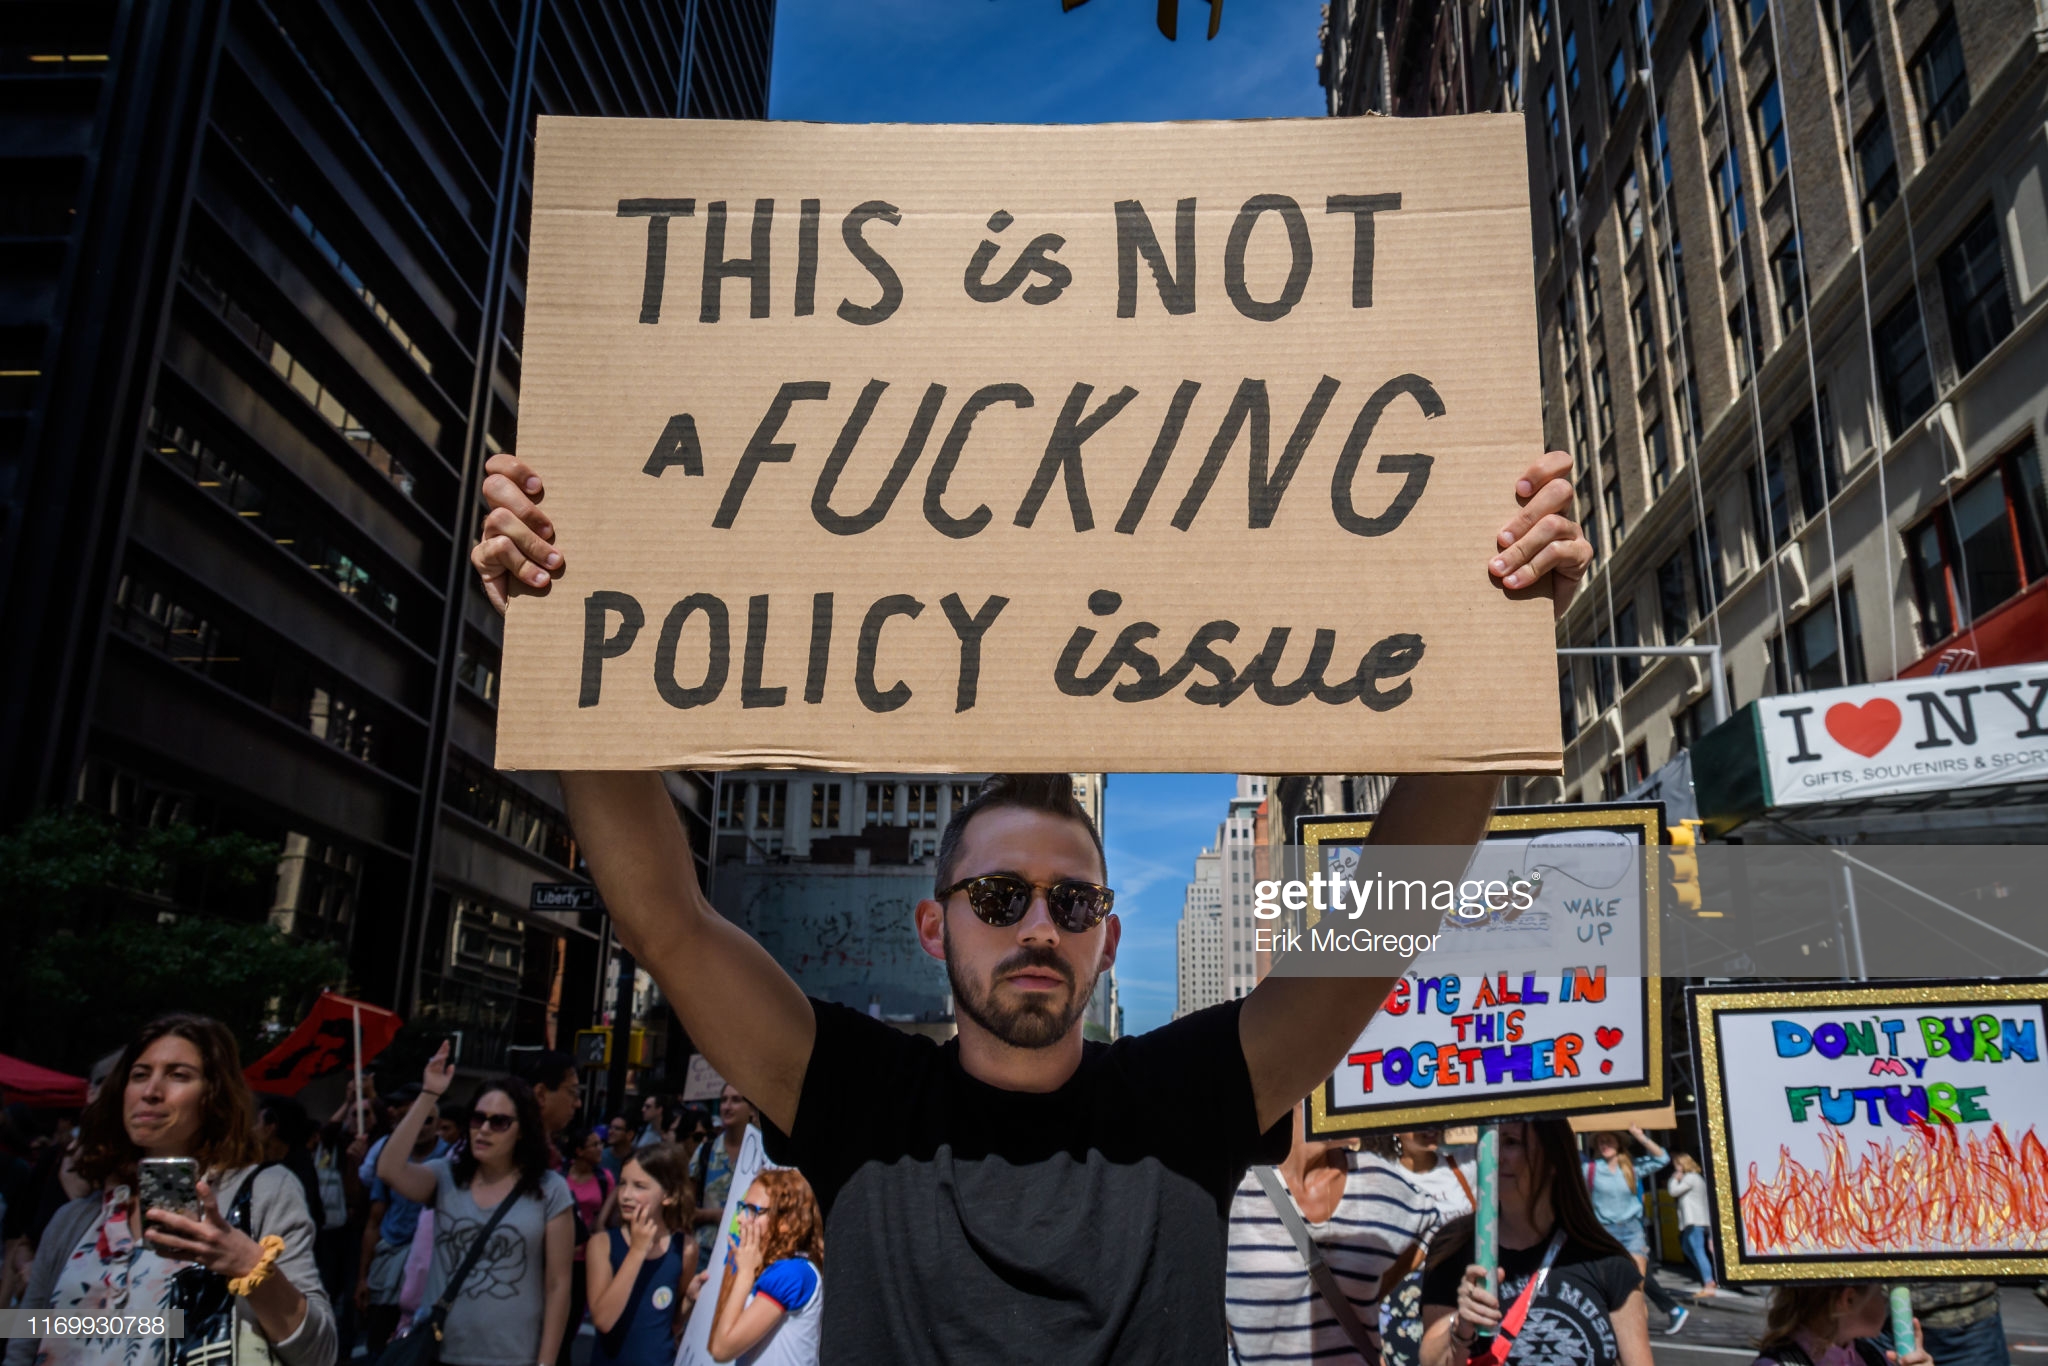 climate-change-protests-2019